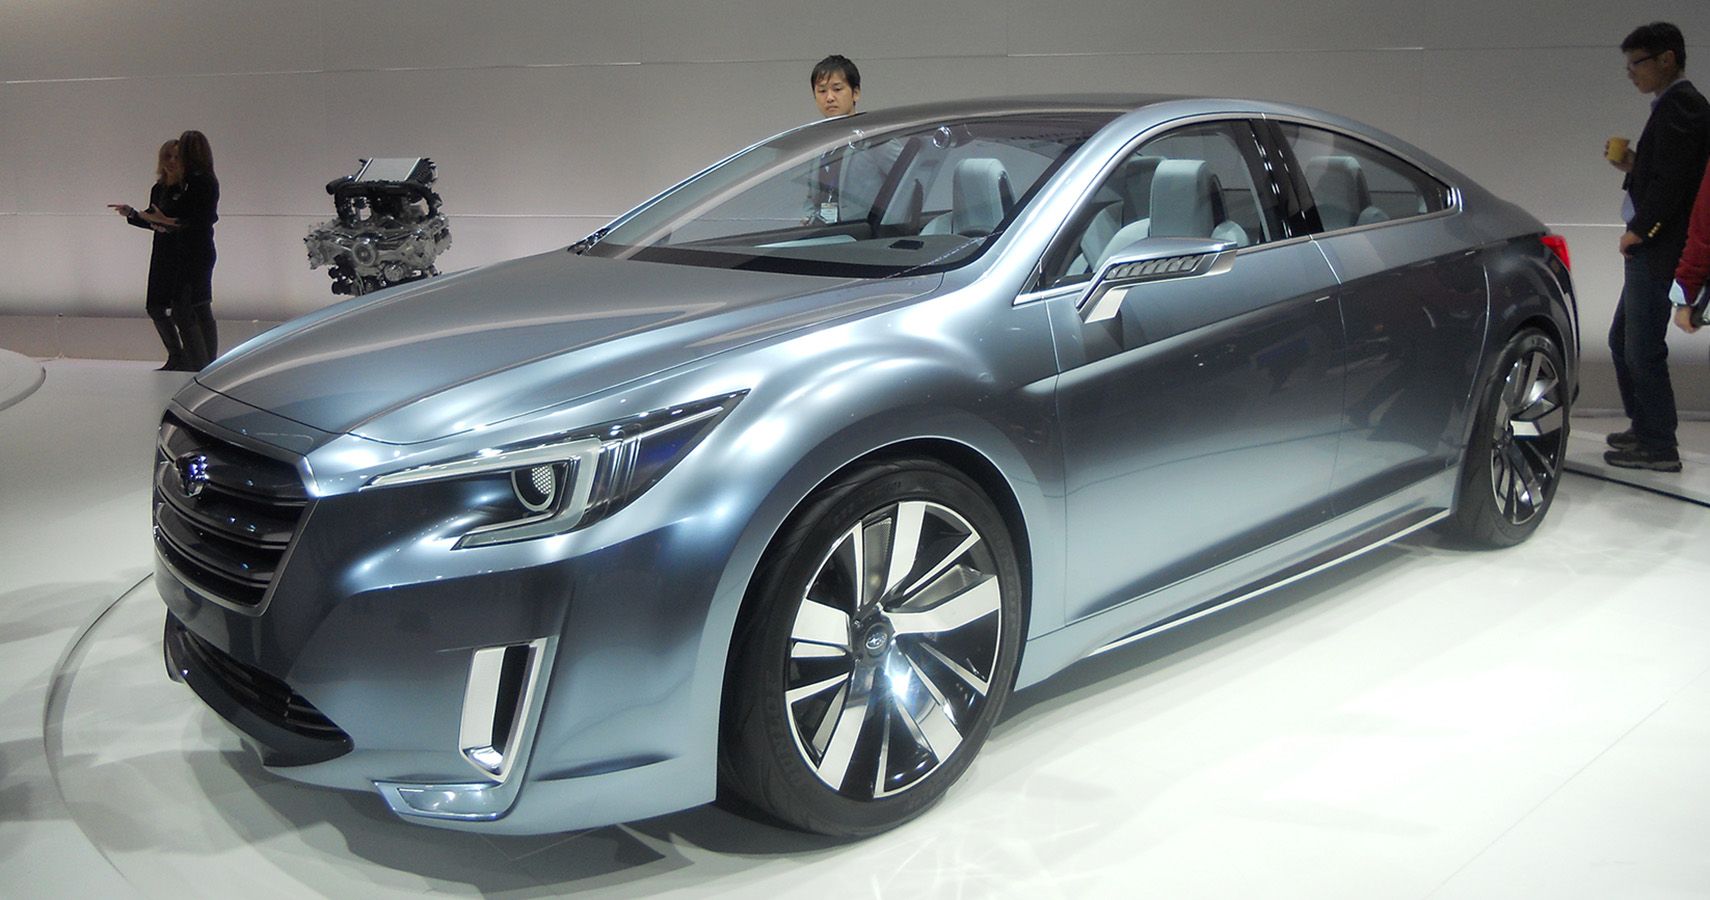 2013 Subaru Legacy Concept: From Slim & Sexy To Dull